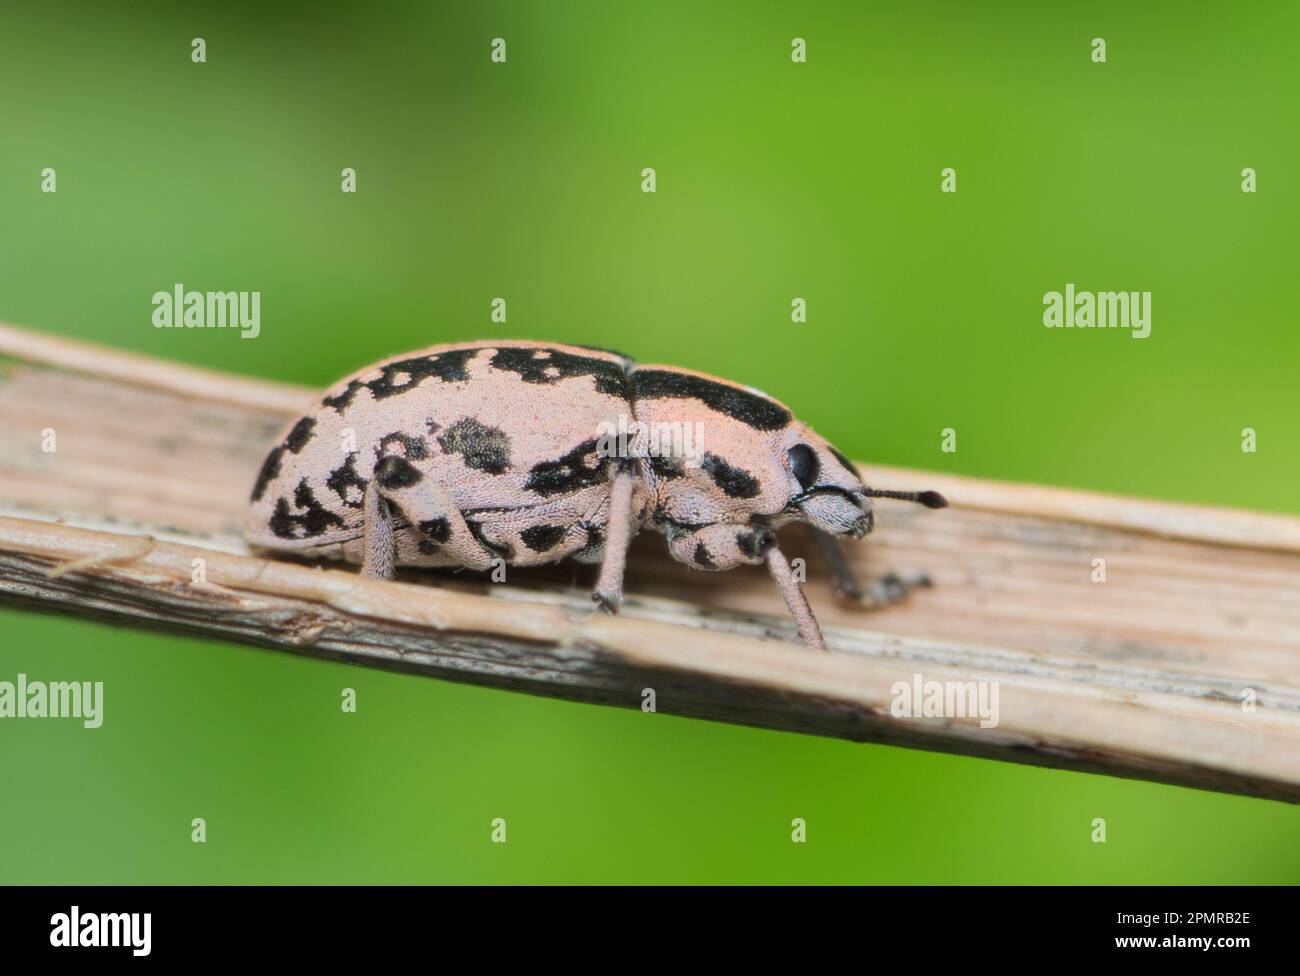 Sesbania Clown Weevil (Eudiagogus rosenschoeldi) on a plant stem. Found in the USA, they are not considered a destructive pest species. Stock Photo